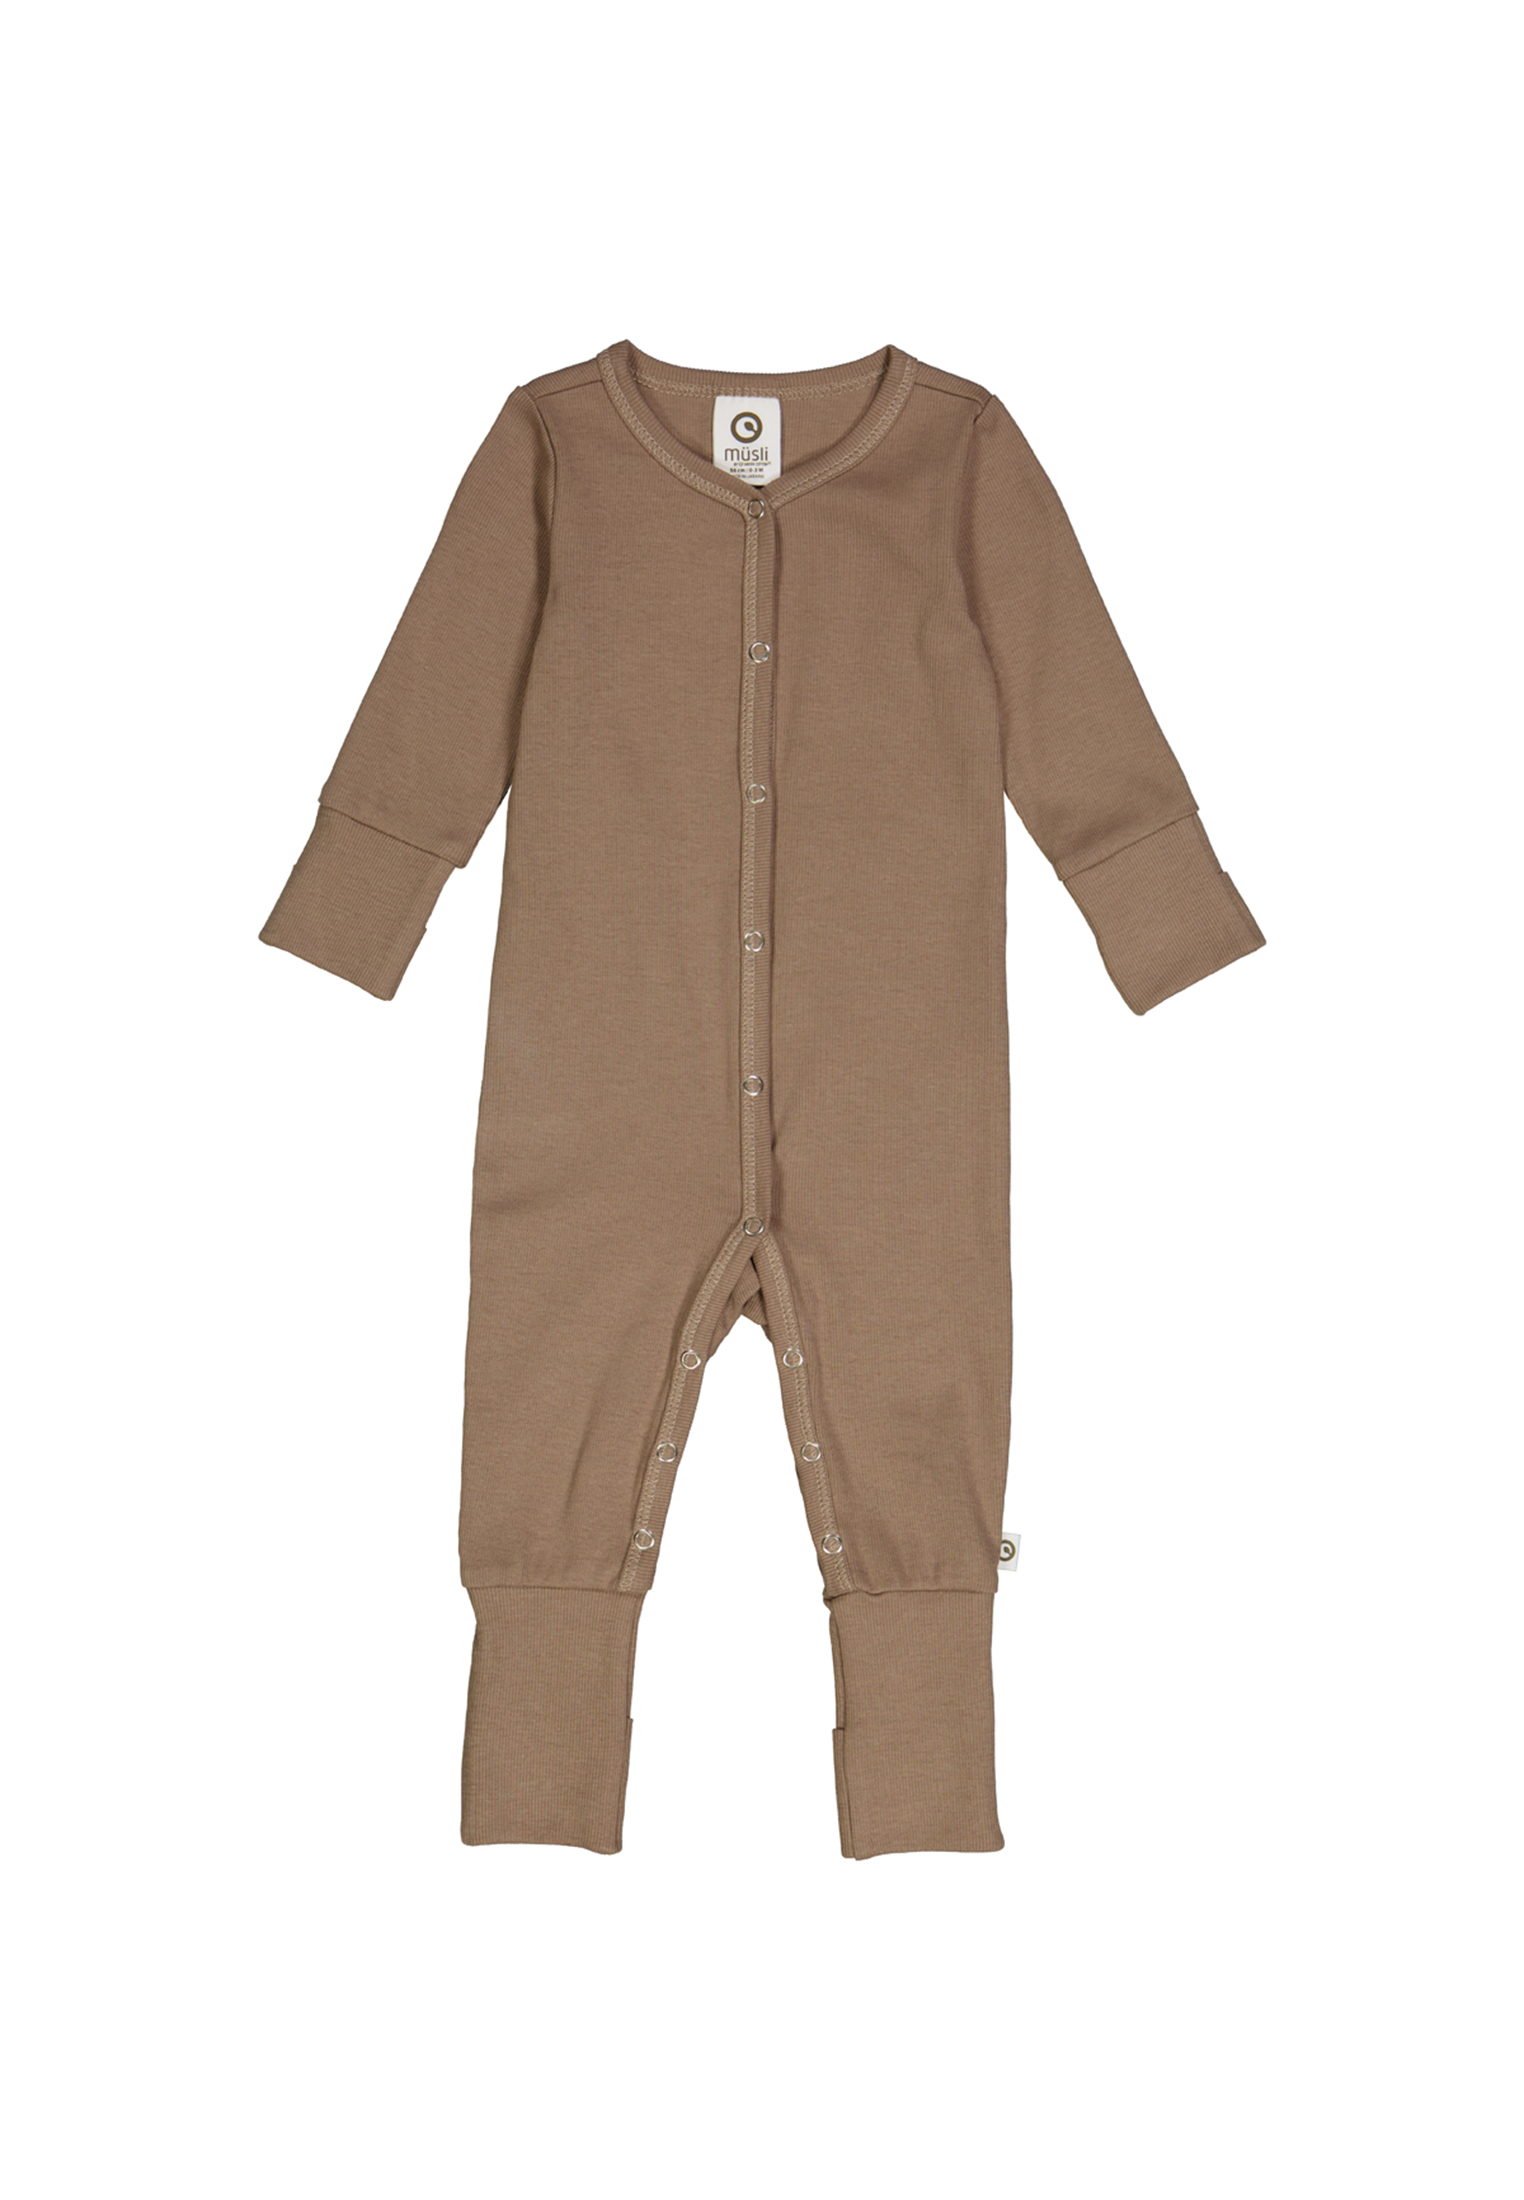 MAMA.LICIOUS Baby-one-piece suit - 1584061600